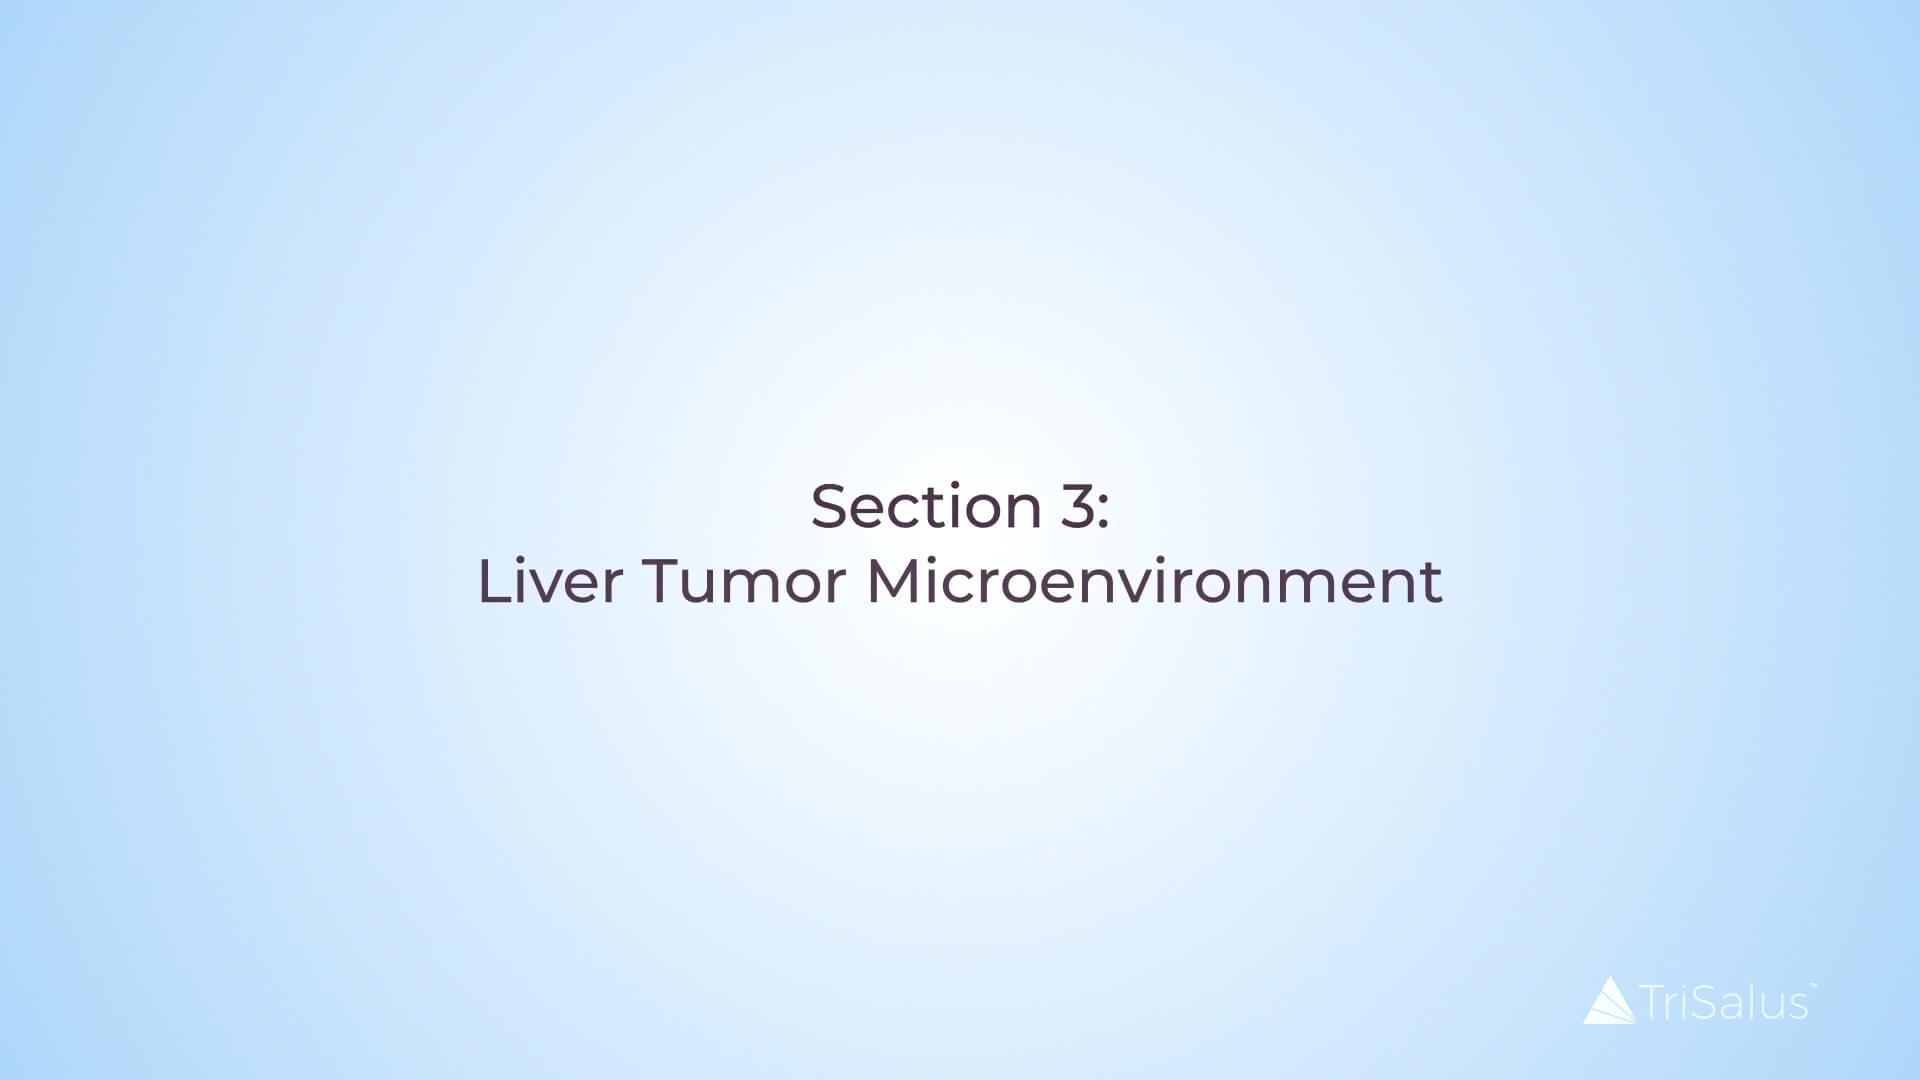 Video Thumbnail with text: Section 3: Liver Tumor Microenvironment